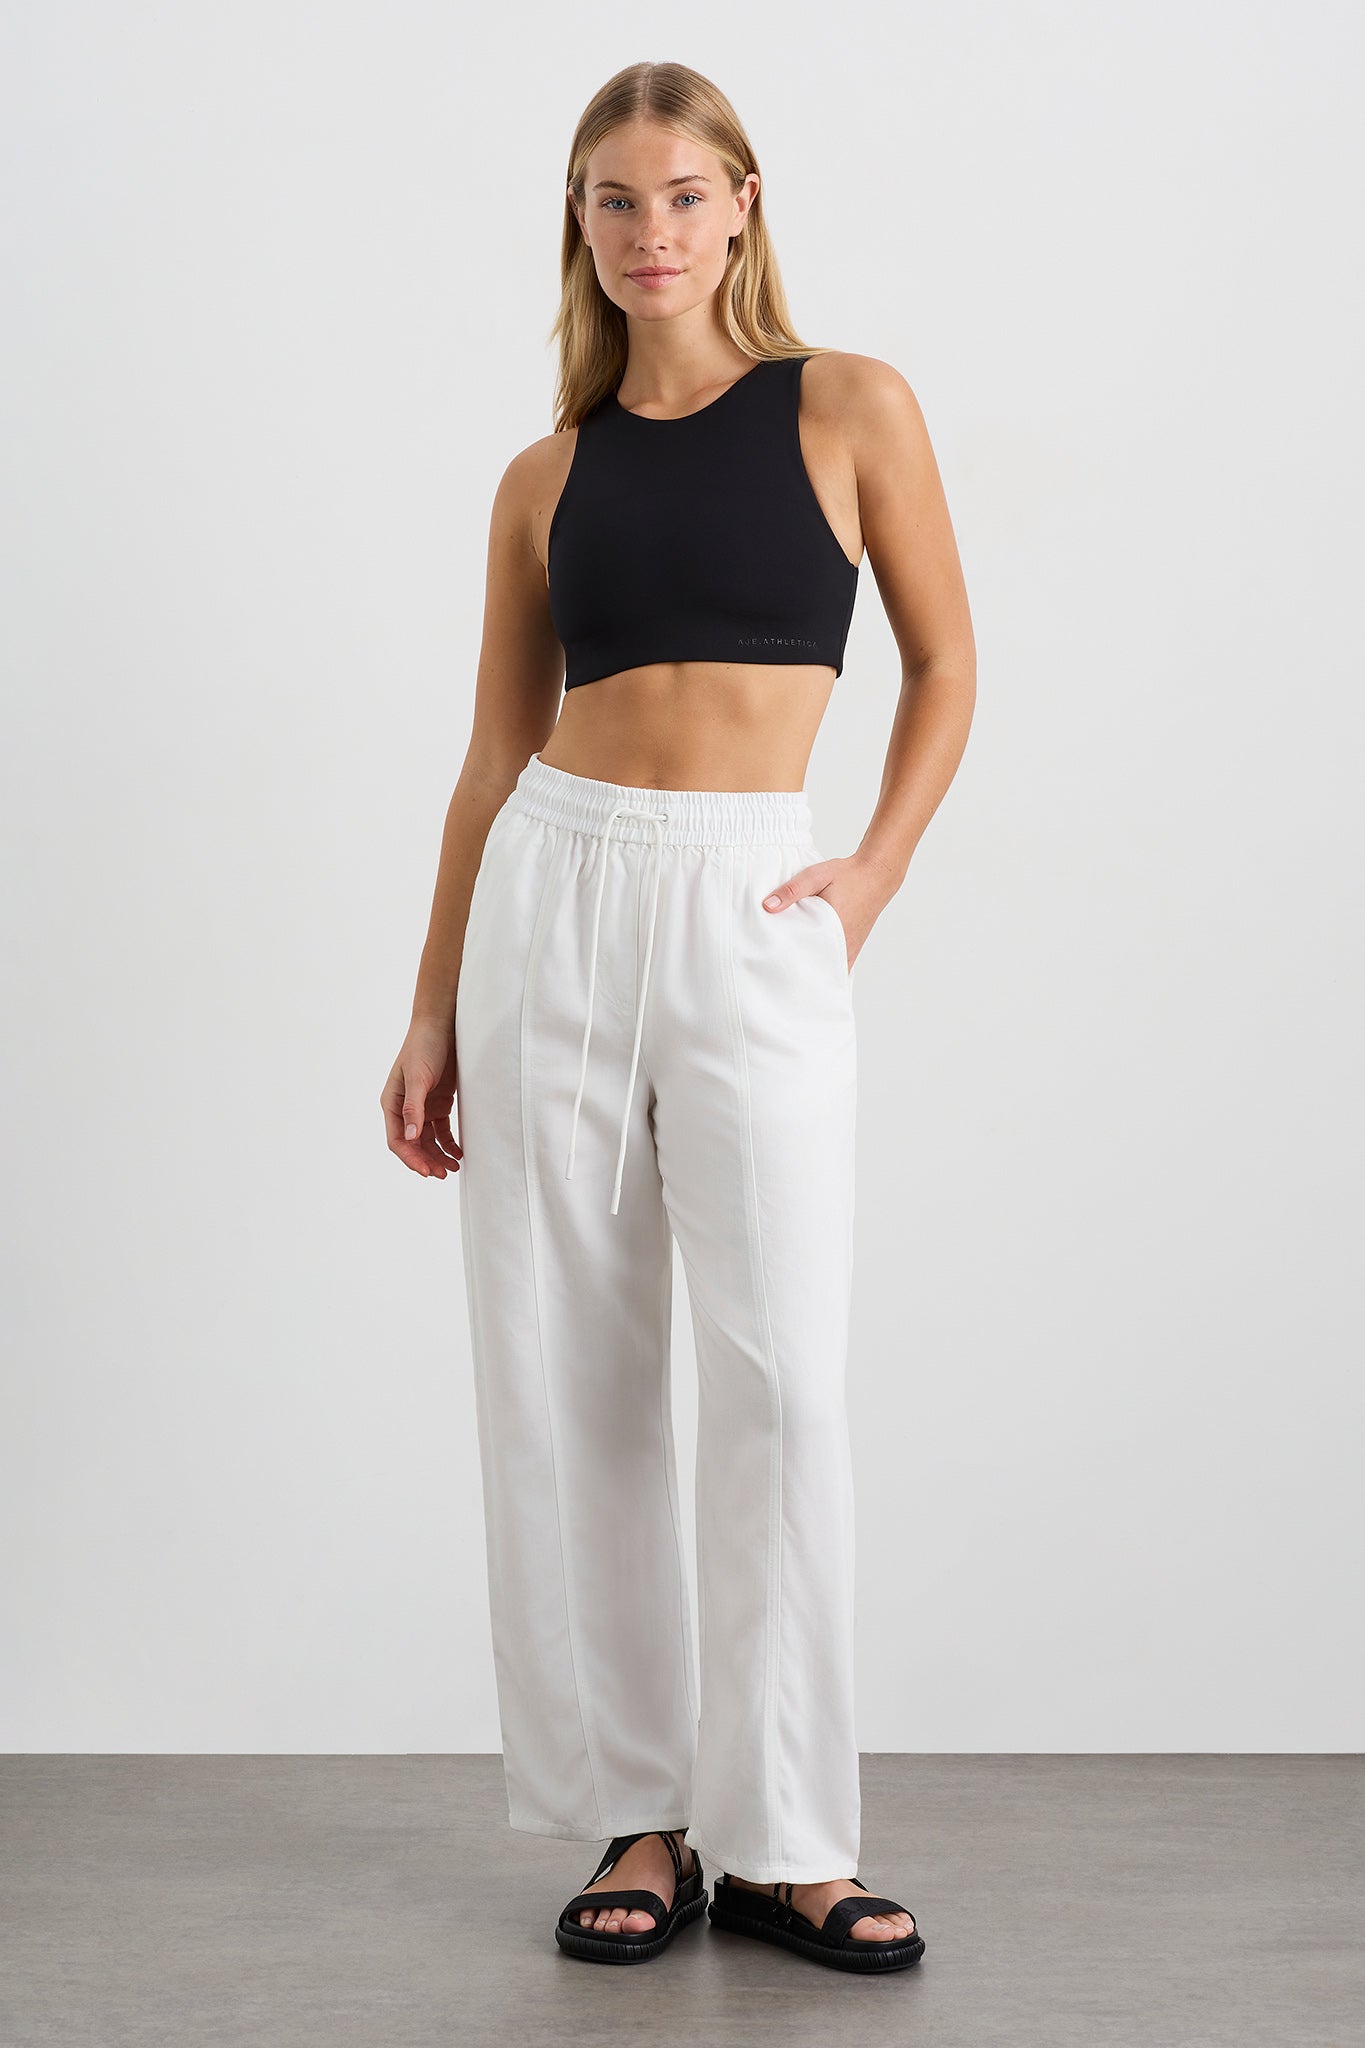 Aje is Taking on Activewear with Style in Its New 'Aje Athletica'  Collection - POPSUGAR Australia